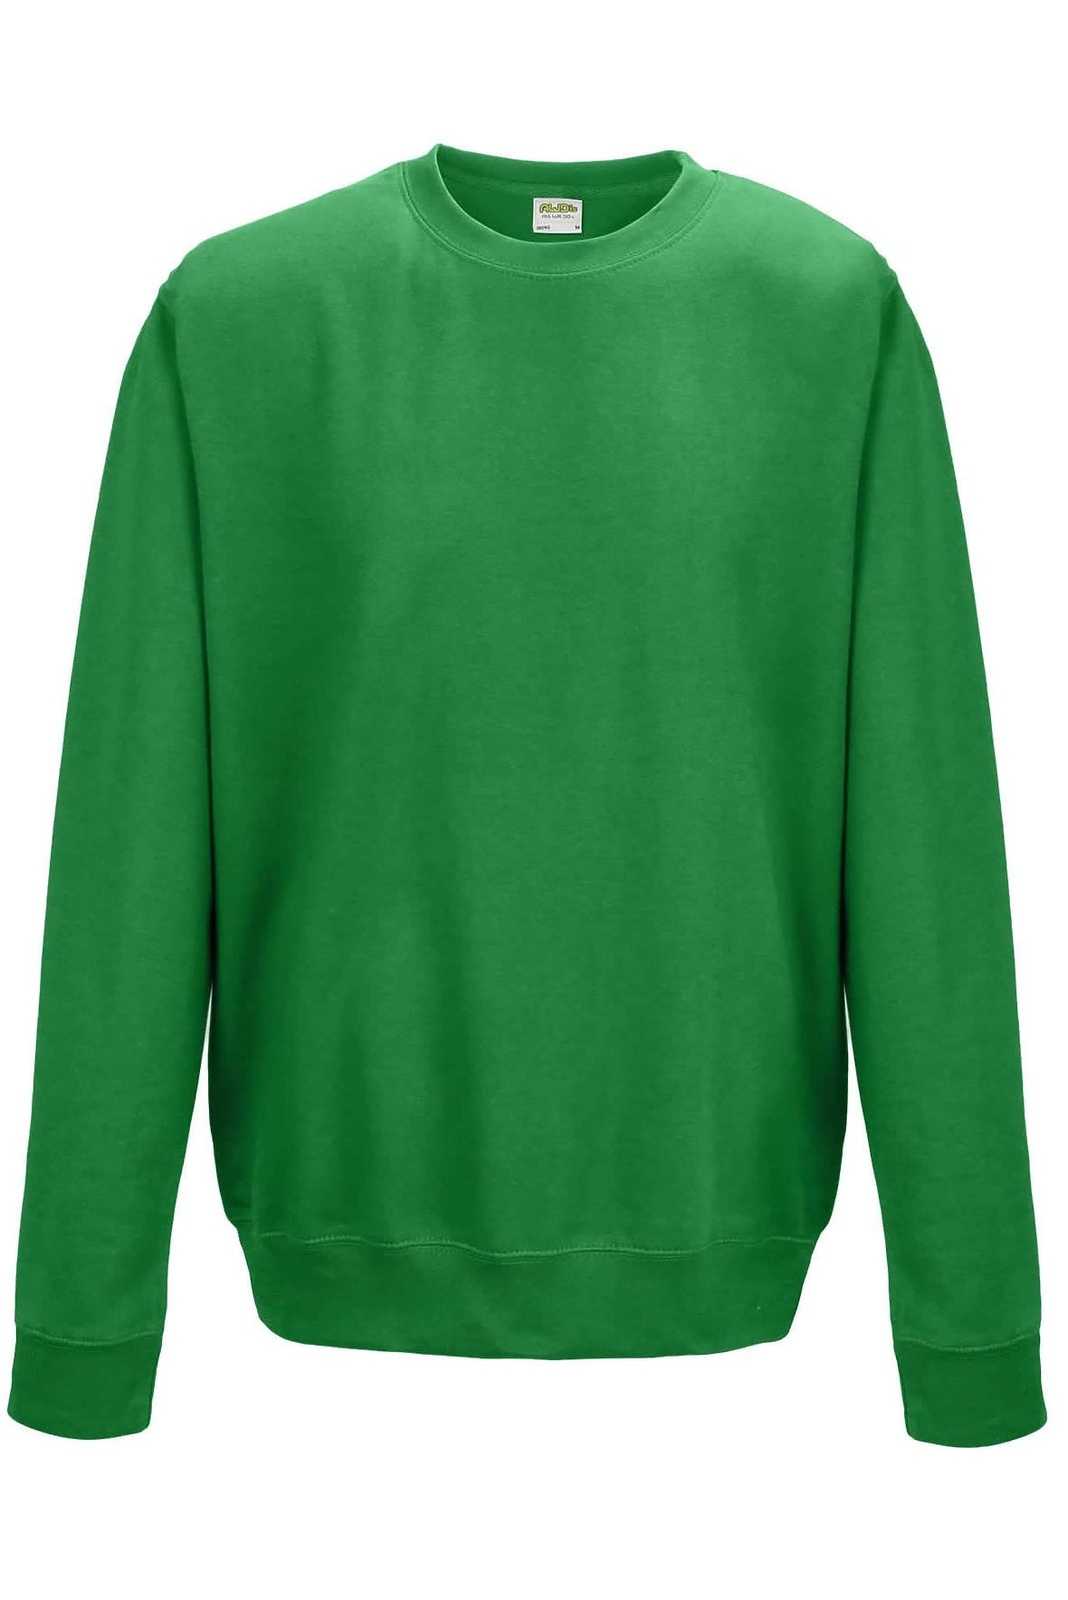 Just Hoods JHA030 College Sweat Crew Neck - Kelly Green - HIT a Double